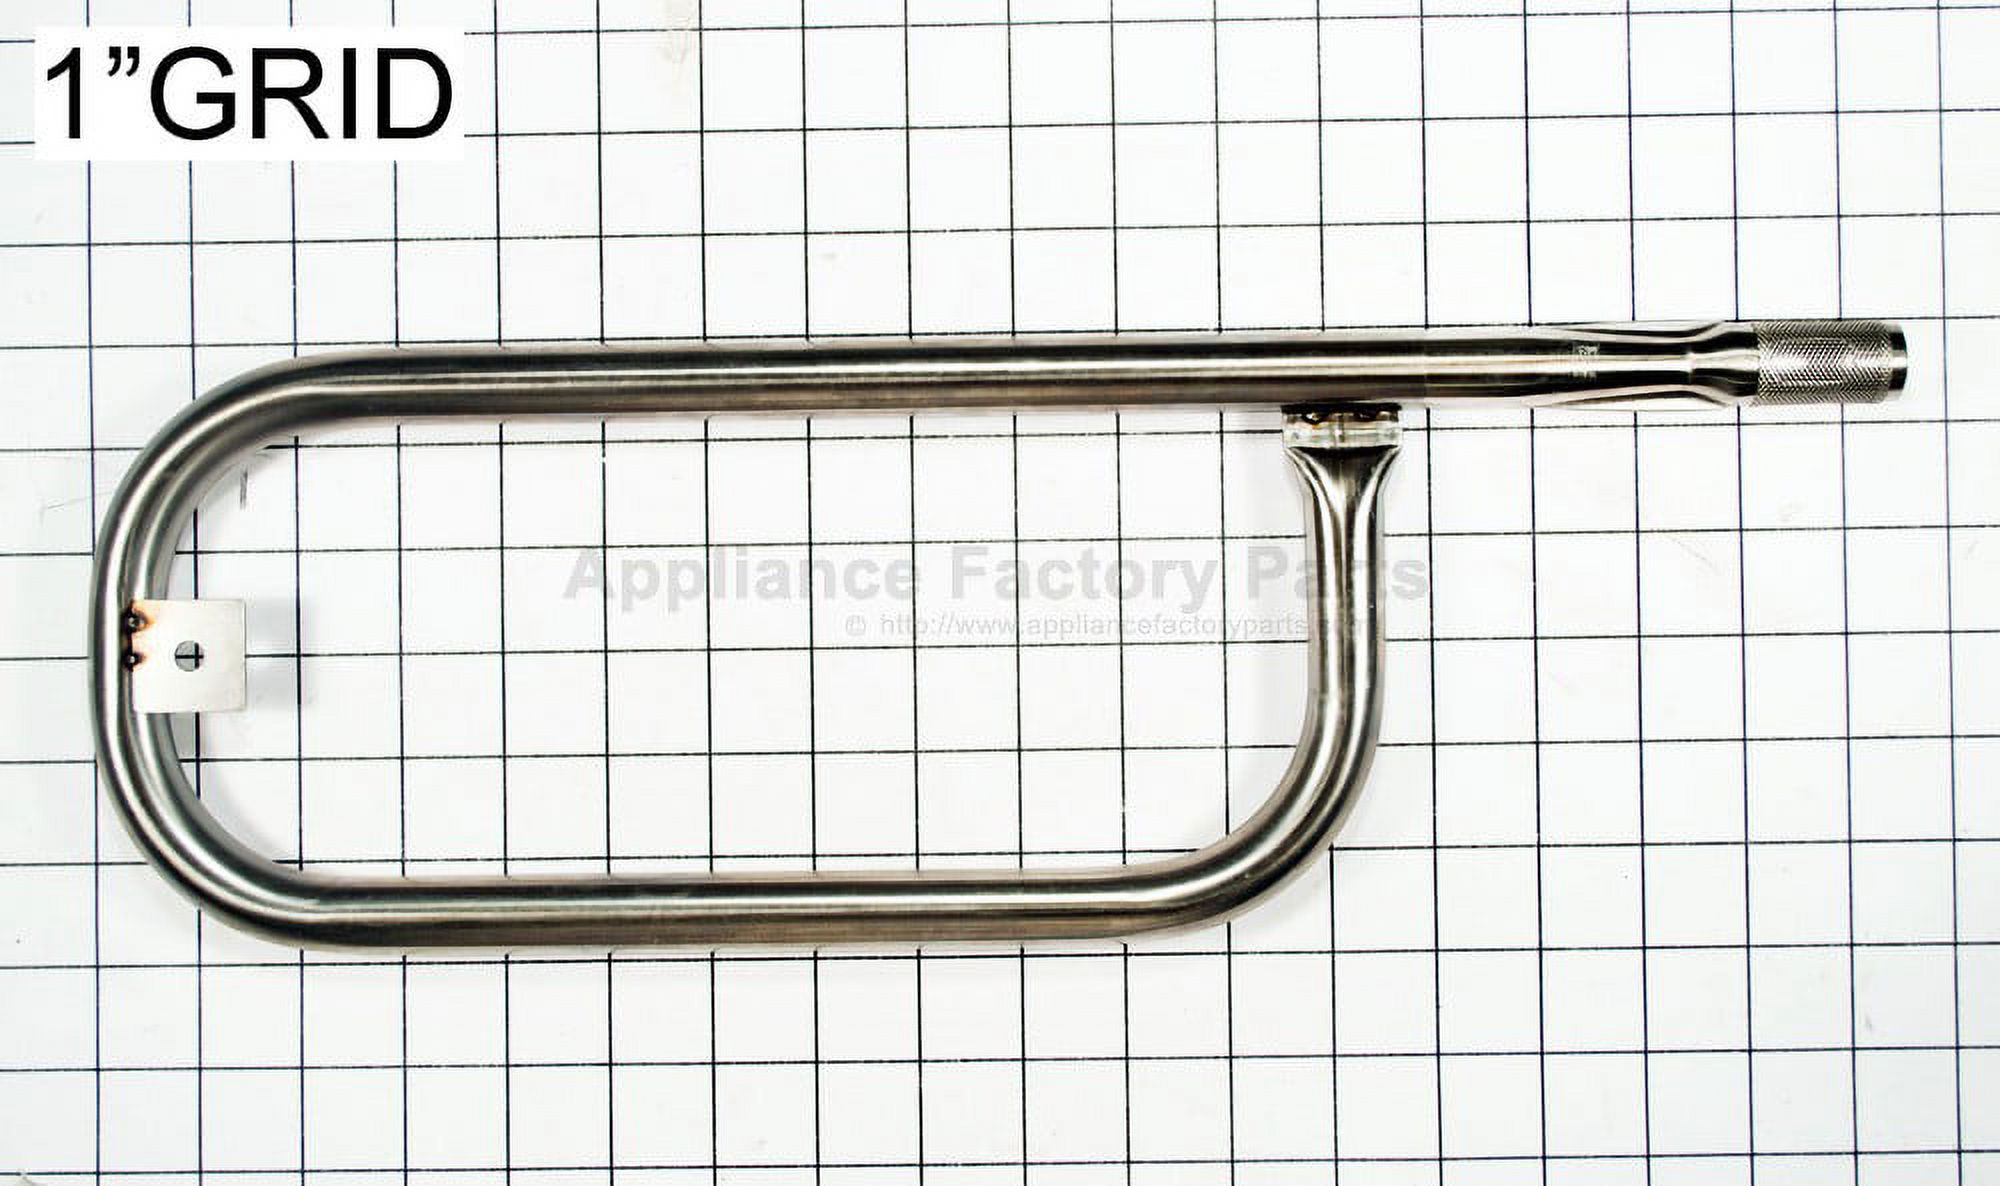 Weber Gas Grill Tube Burner Only Fits Q100, Q120, Q1200 Model Numbers - image 4 of 9